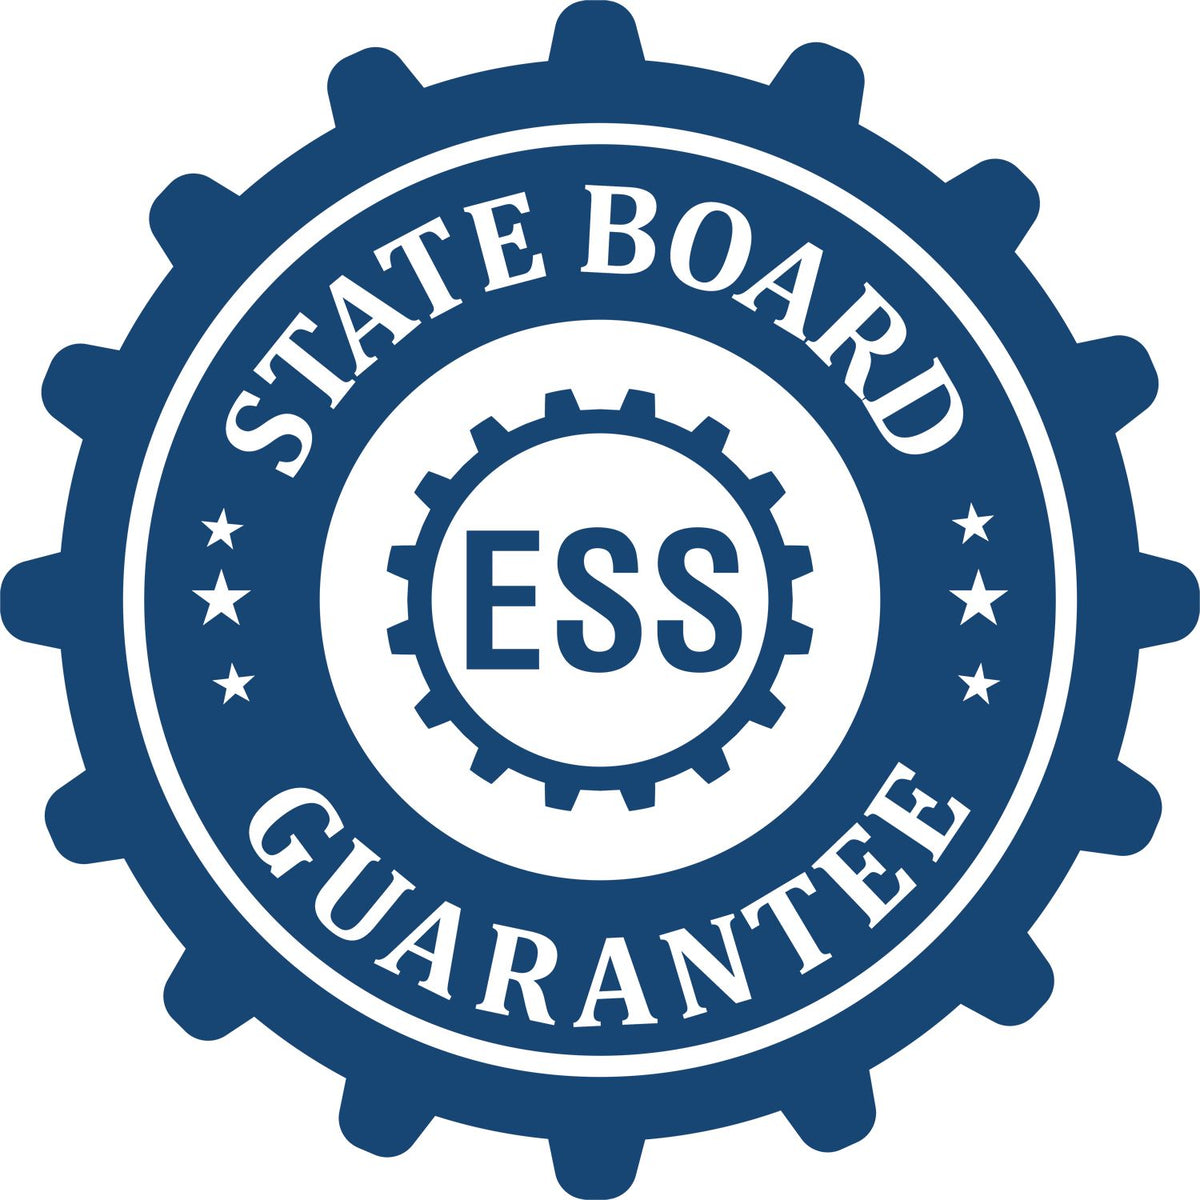 An emblem in a gear shape illustrating a state board guarantee for the Hybrid New Mexico Landscape Architect Seal